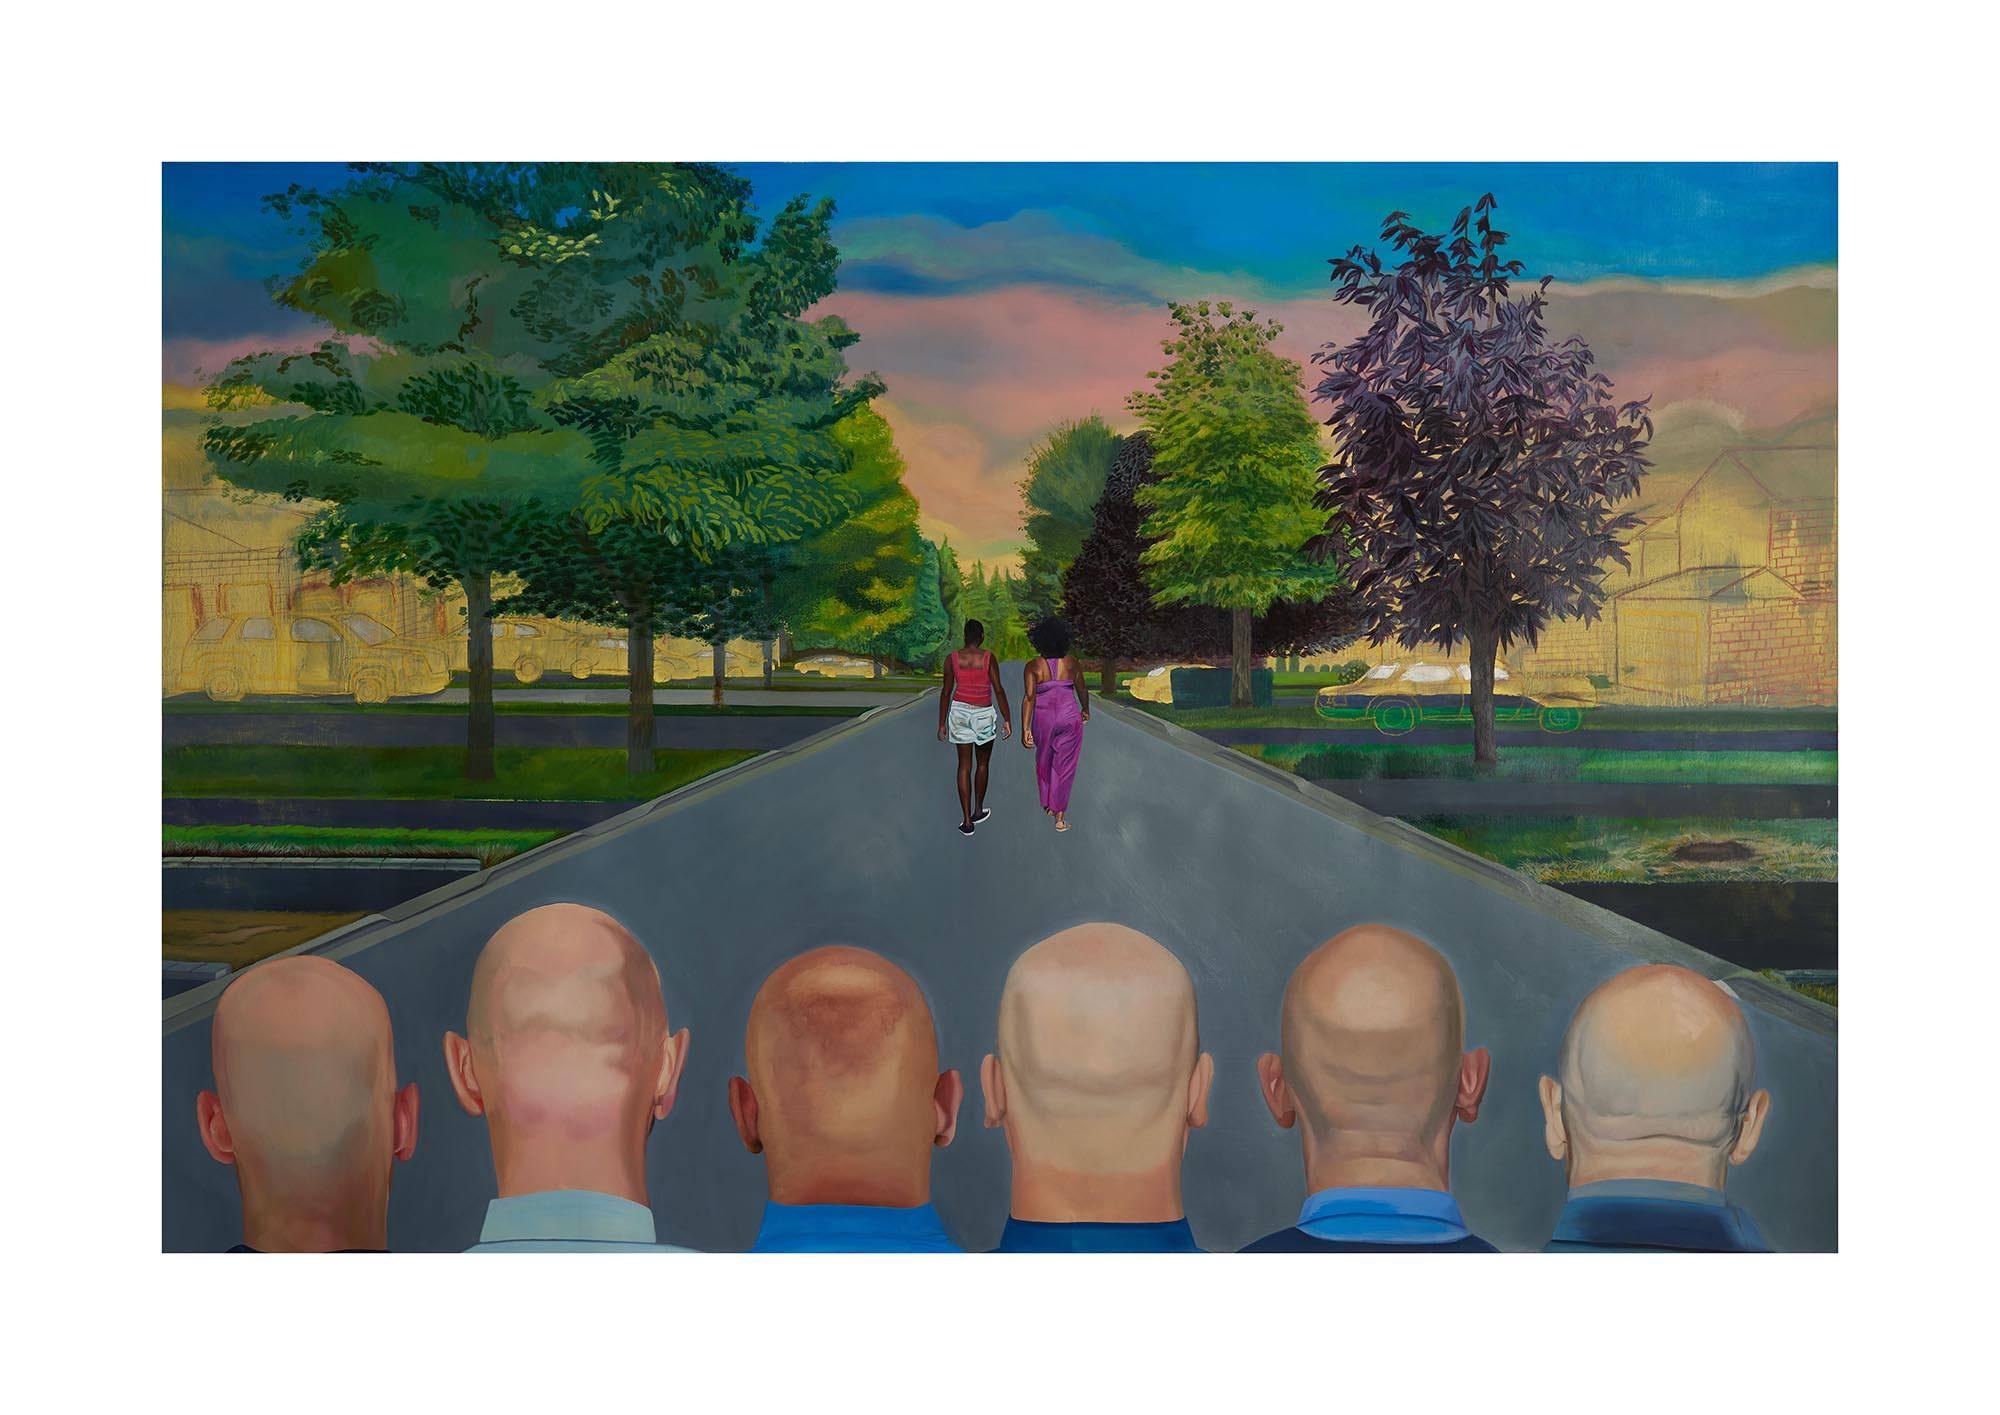 A painting of six bald men with light skin in blue collared shirts watch two women with dark skin walk down a street